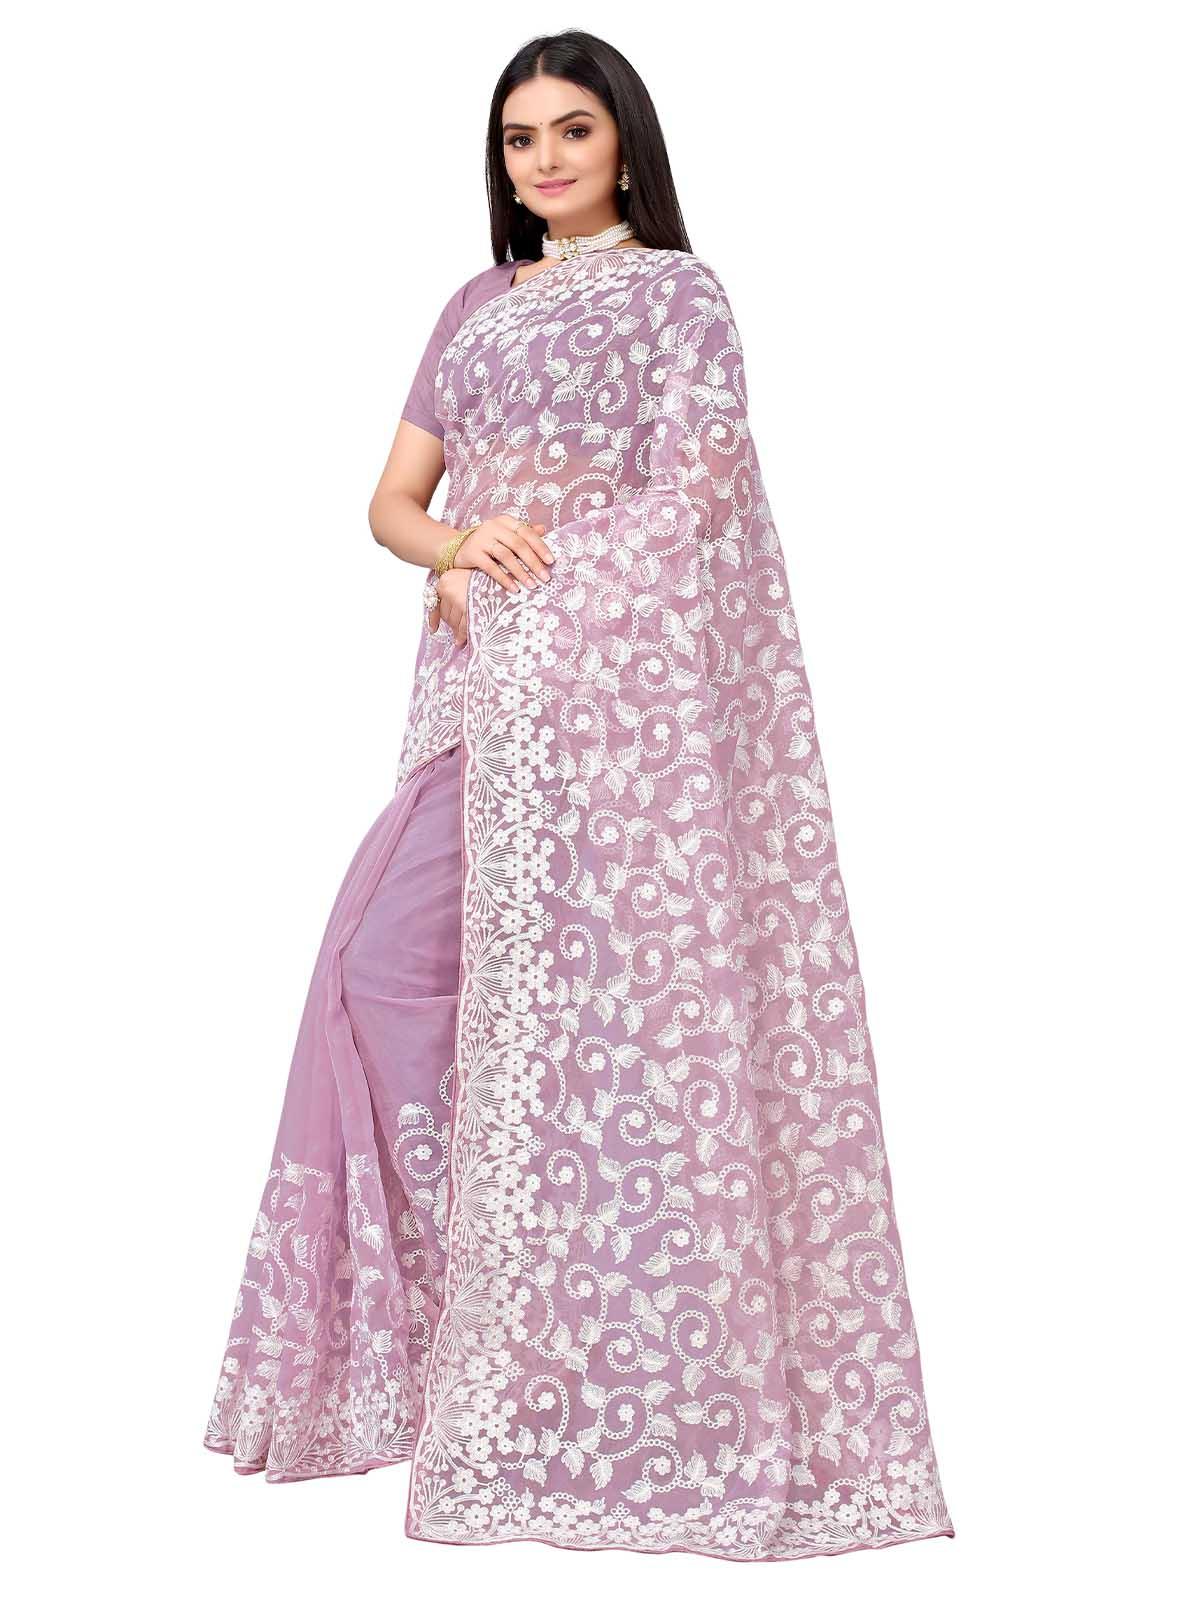 Lilac Organza Embroidered Saree With Blouse - Odette